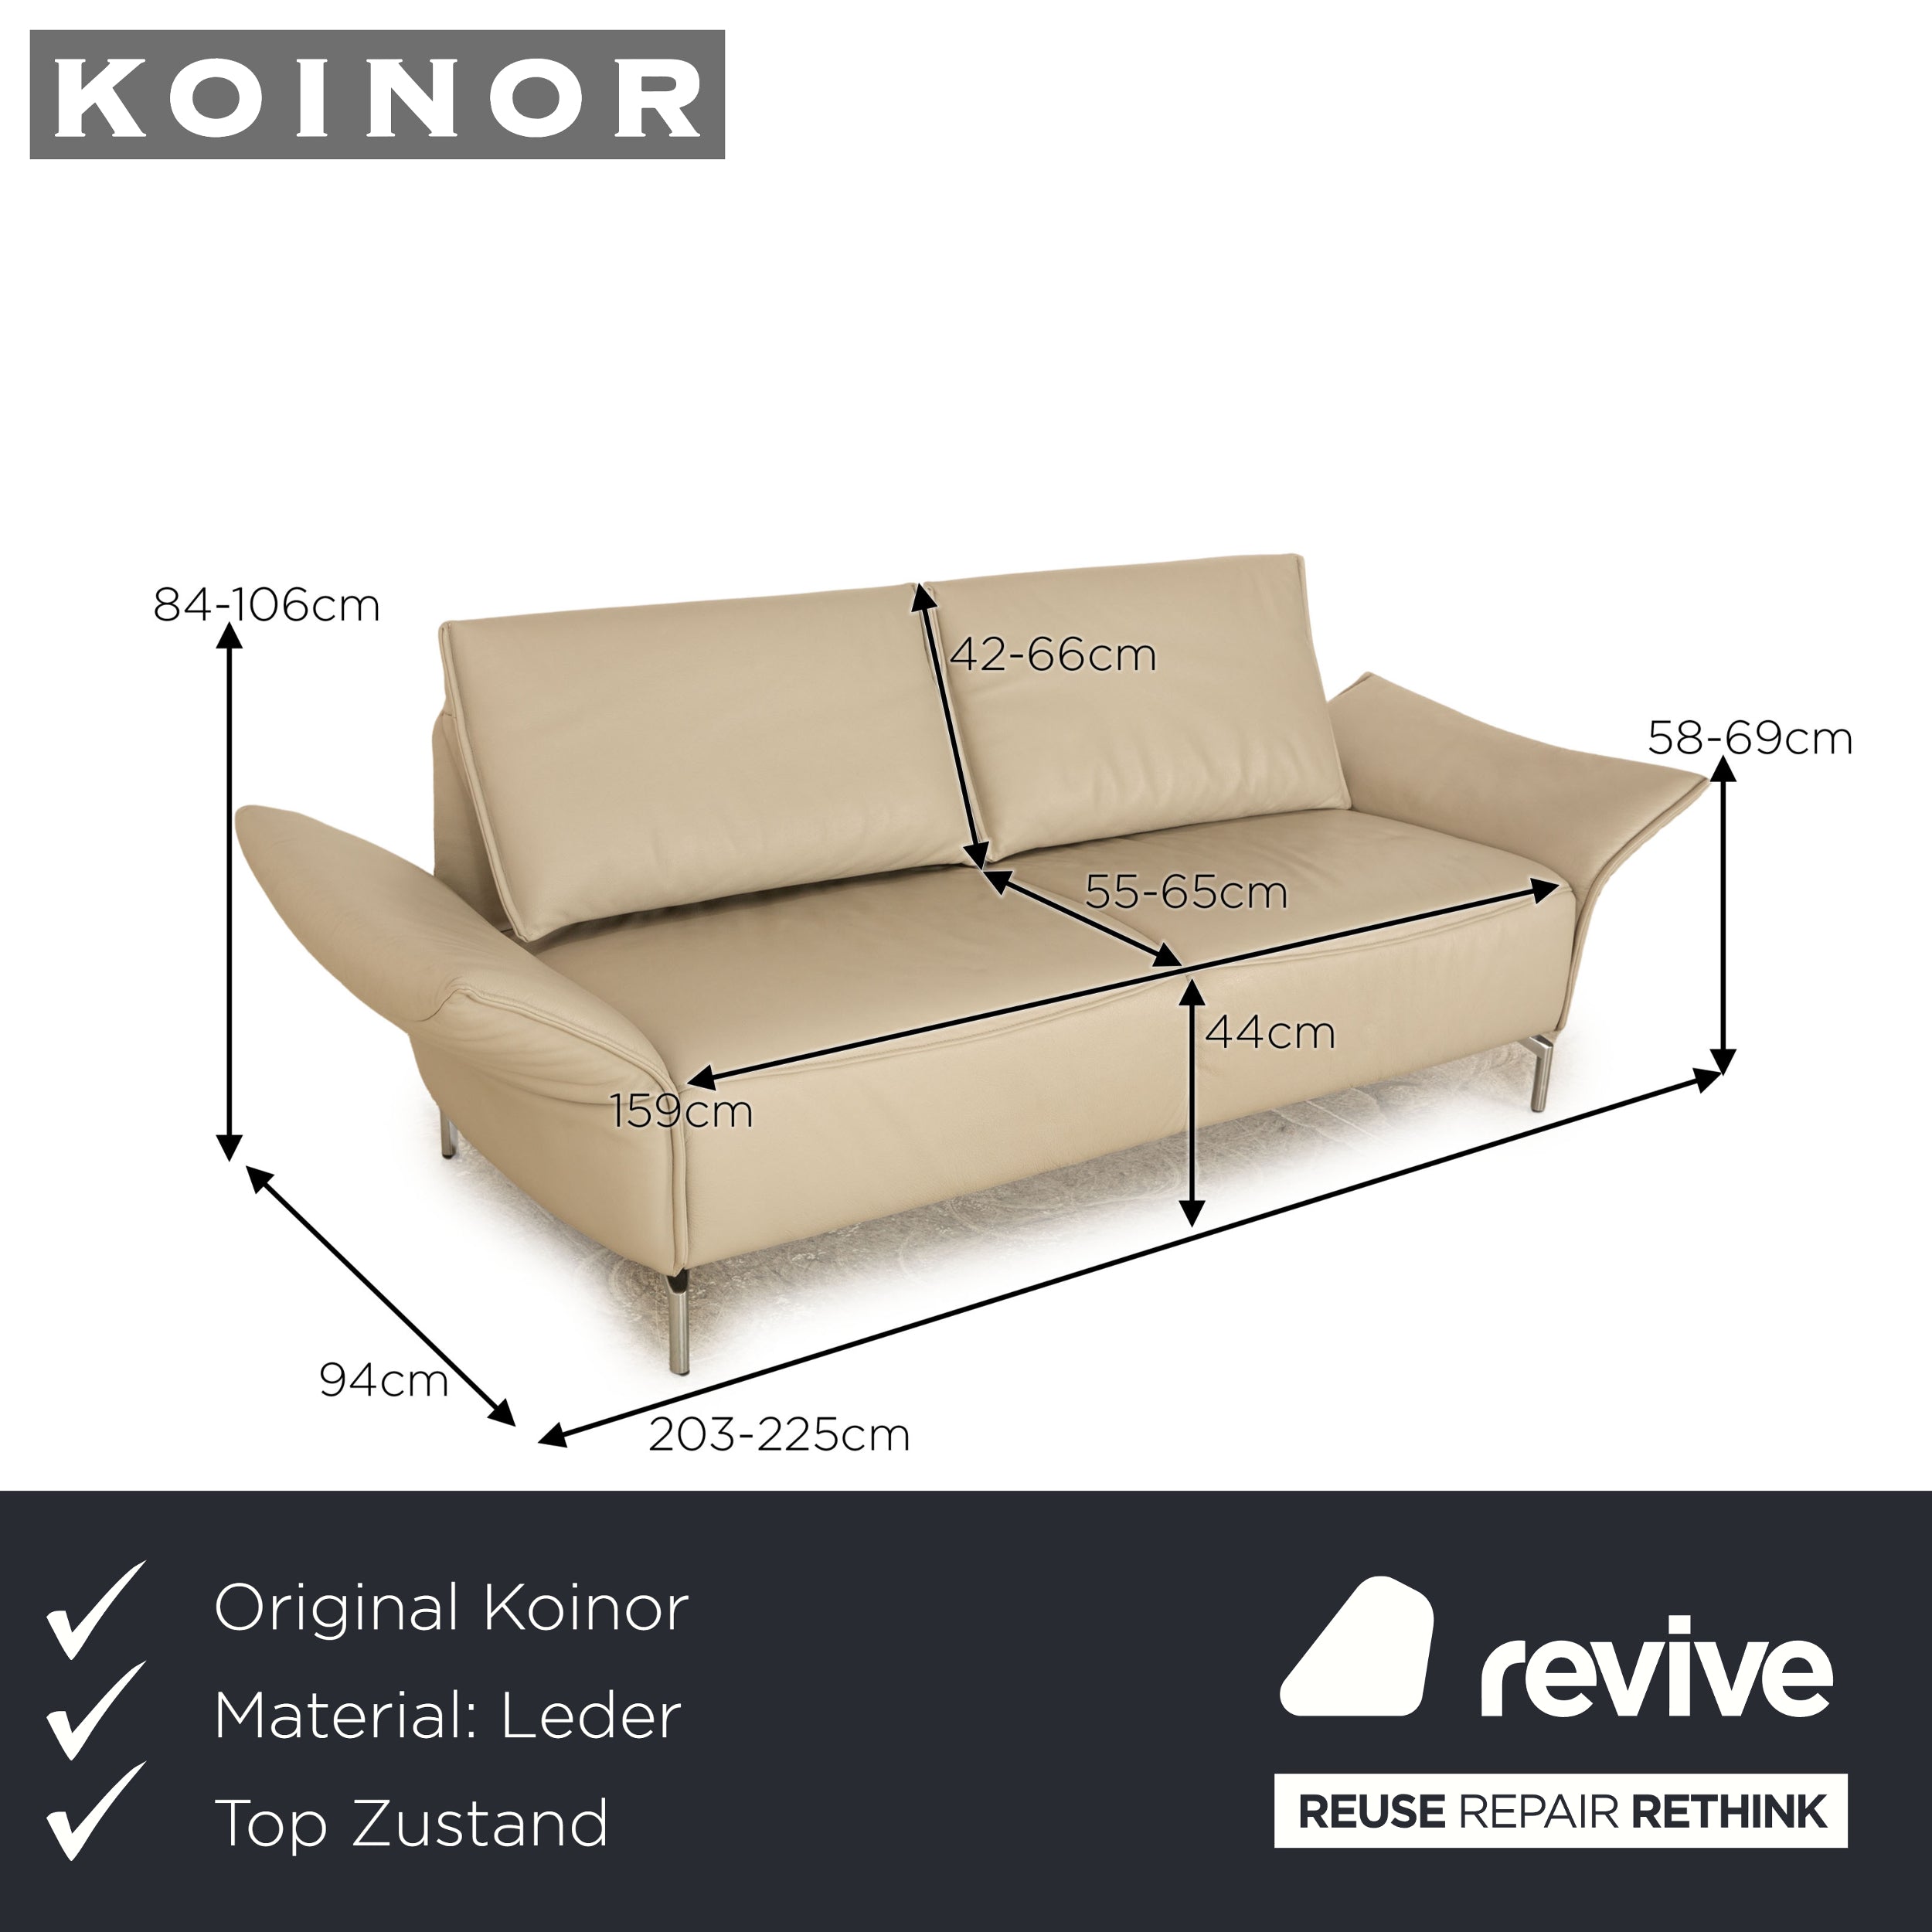 Koinor Vanda Leather Two Seater Cream Sofa Couch Manual Function